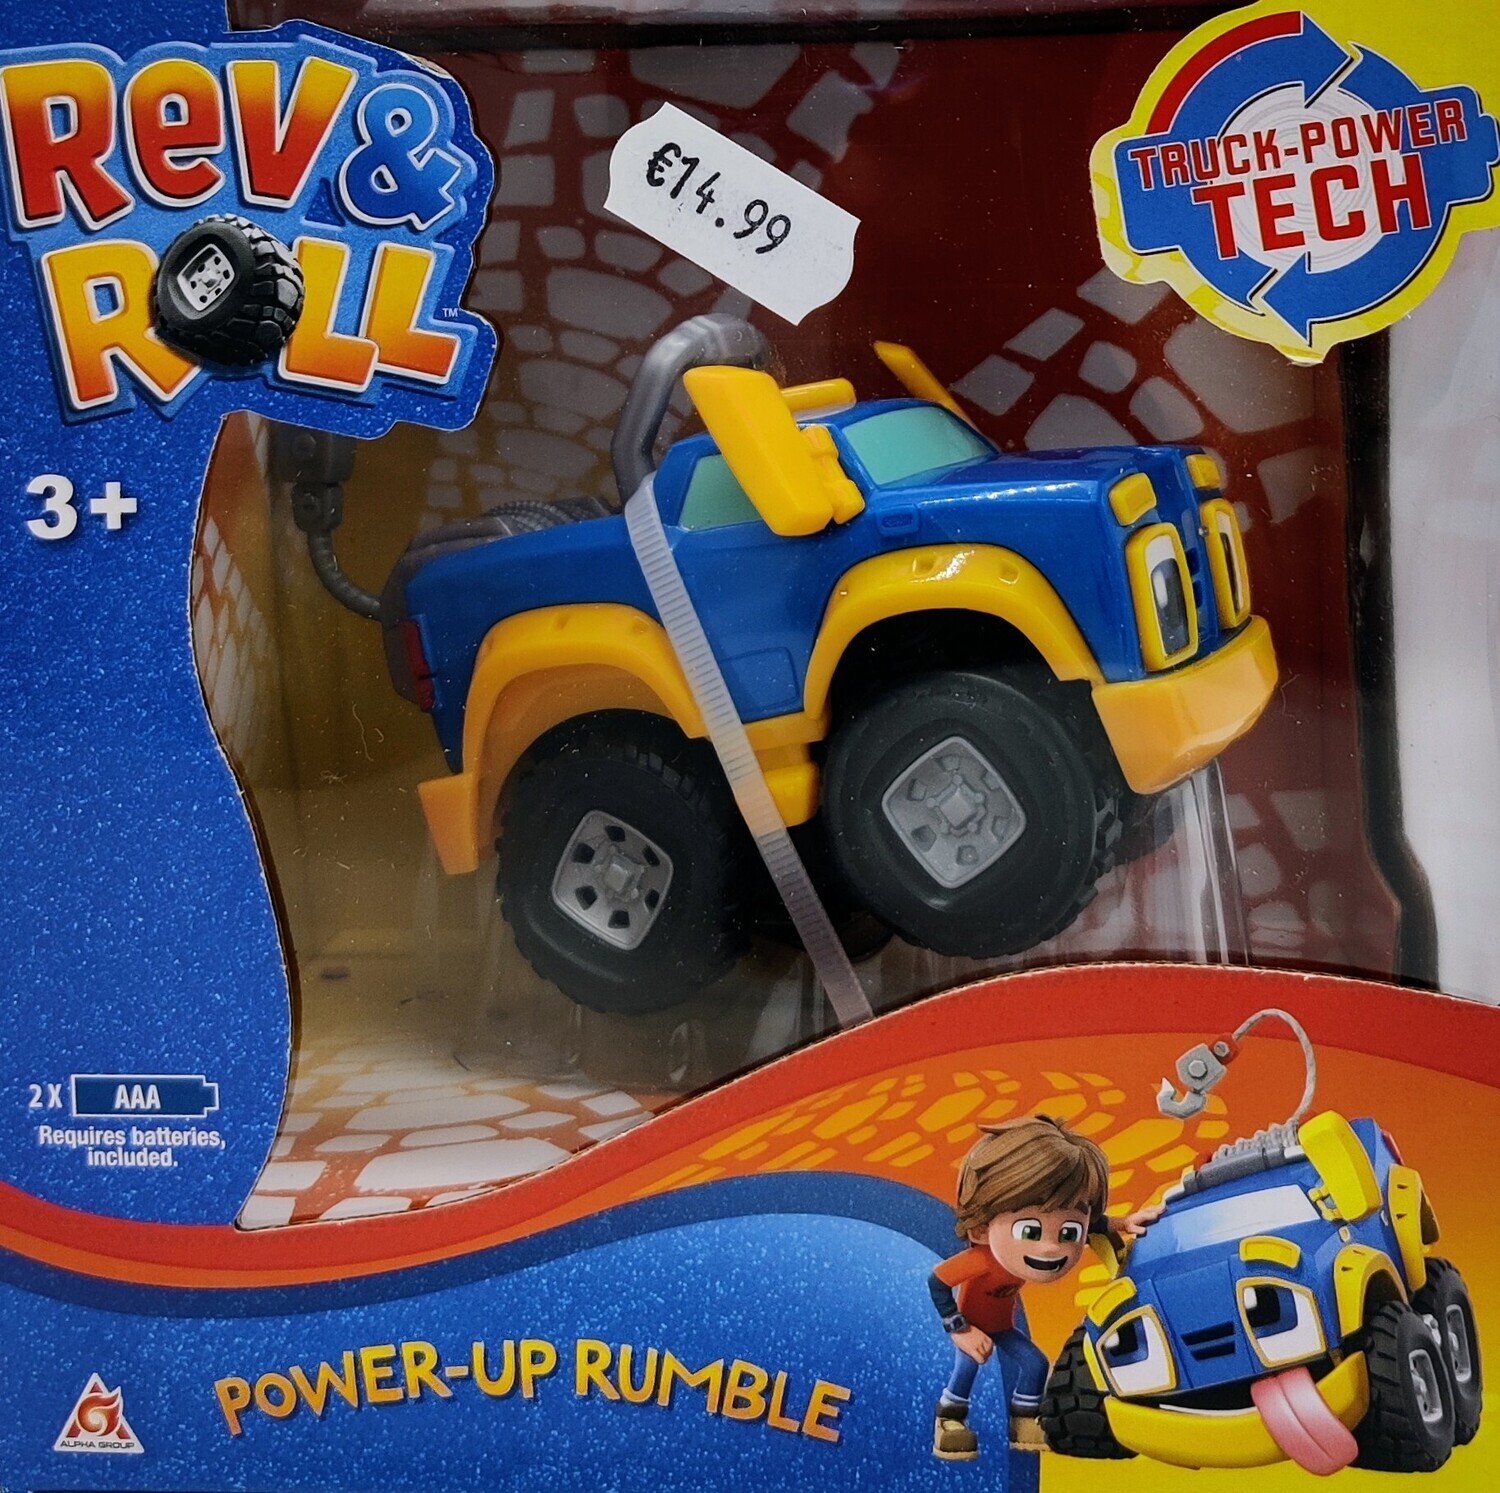 Rev & Roll Power Up Rumble